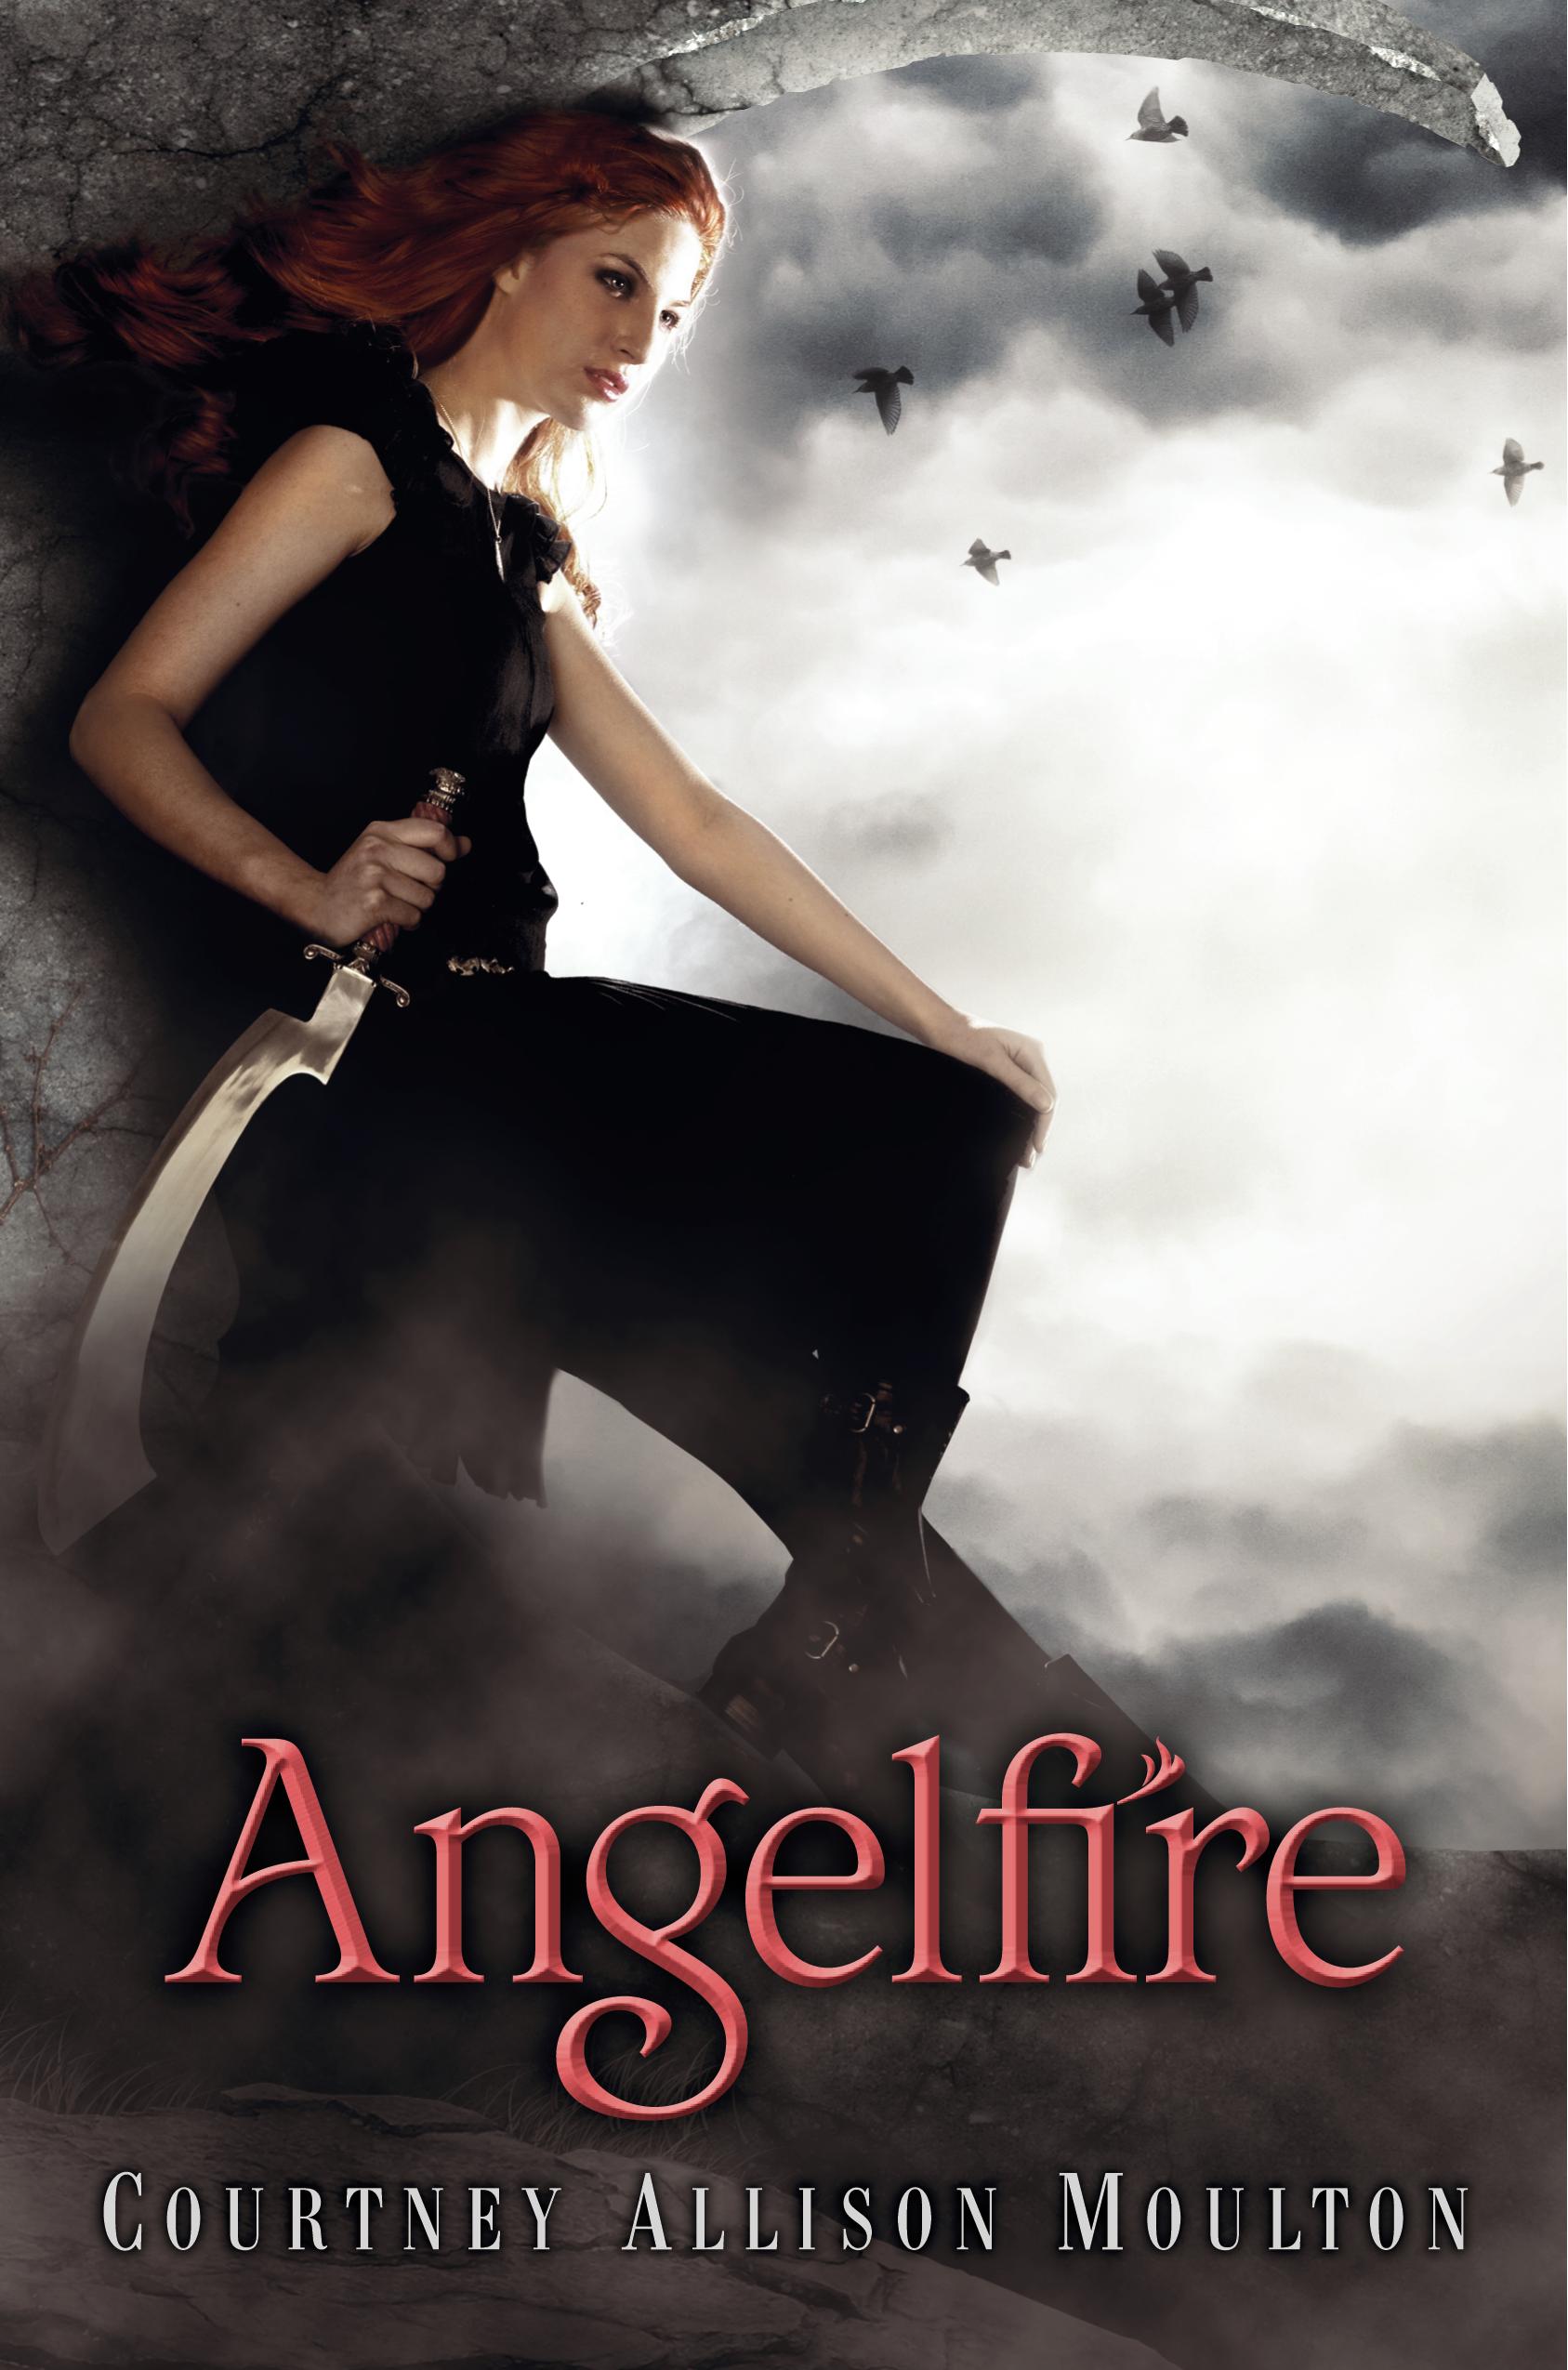 Review: Angelfire by Courtney Allison Moulton